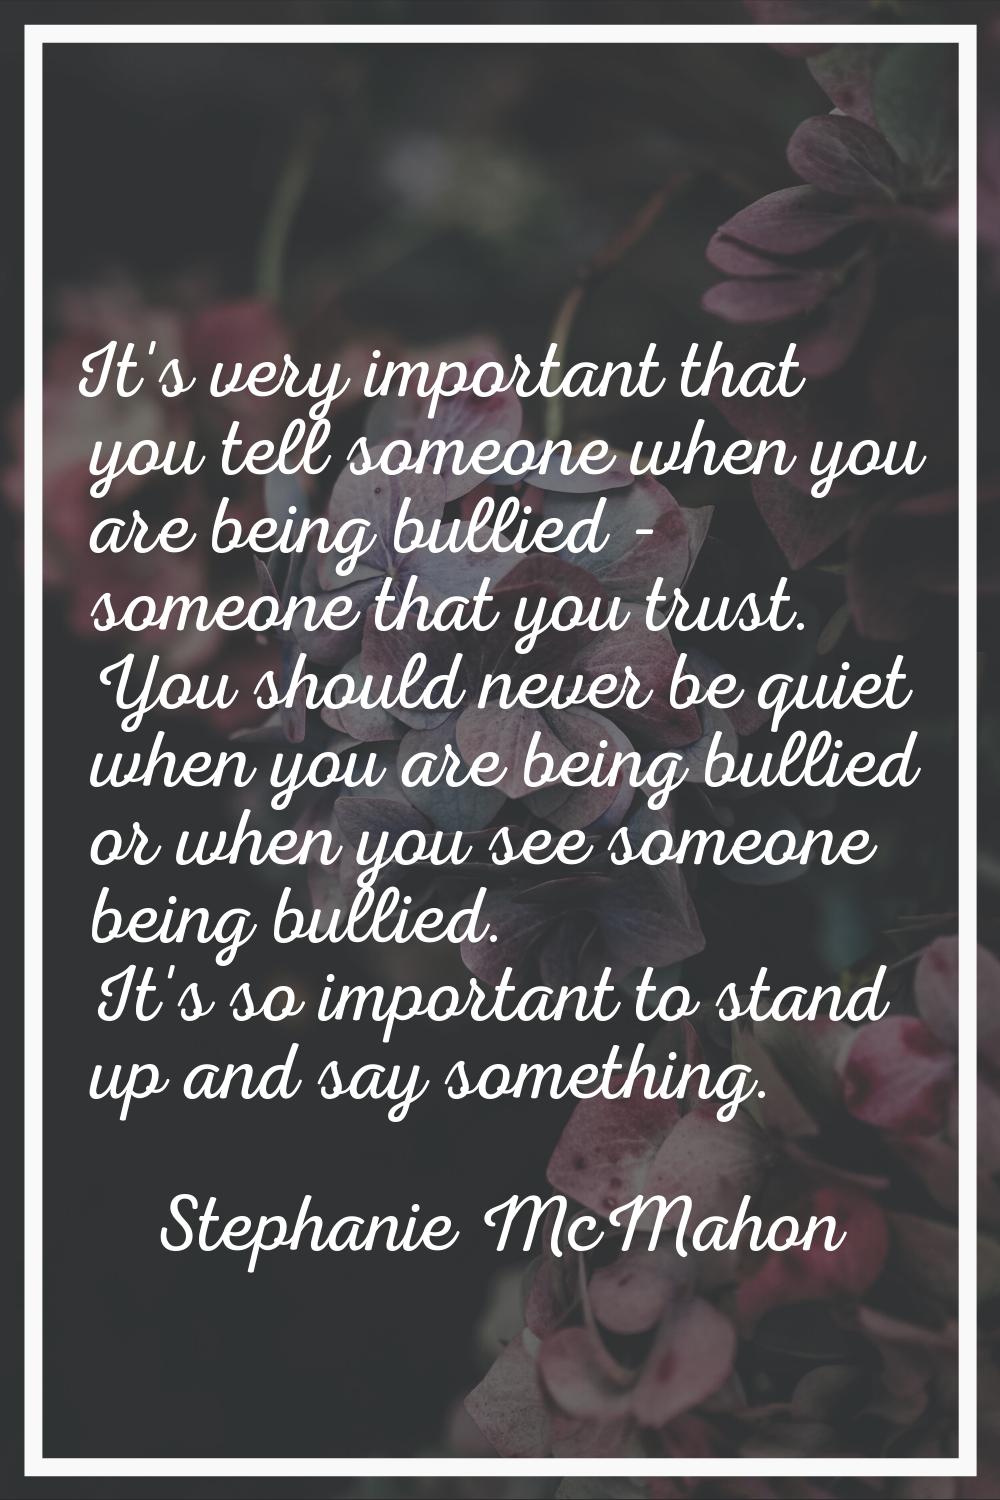 It's very important that you tell someone when you are being bullied - someone that you trust. You 